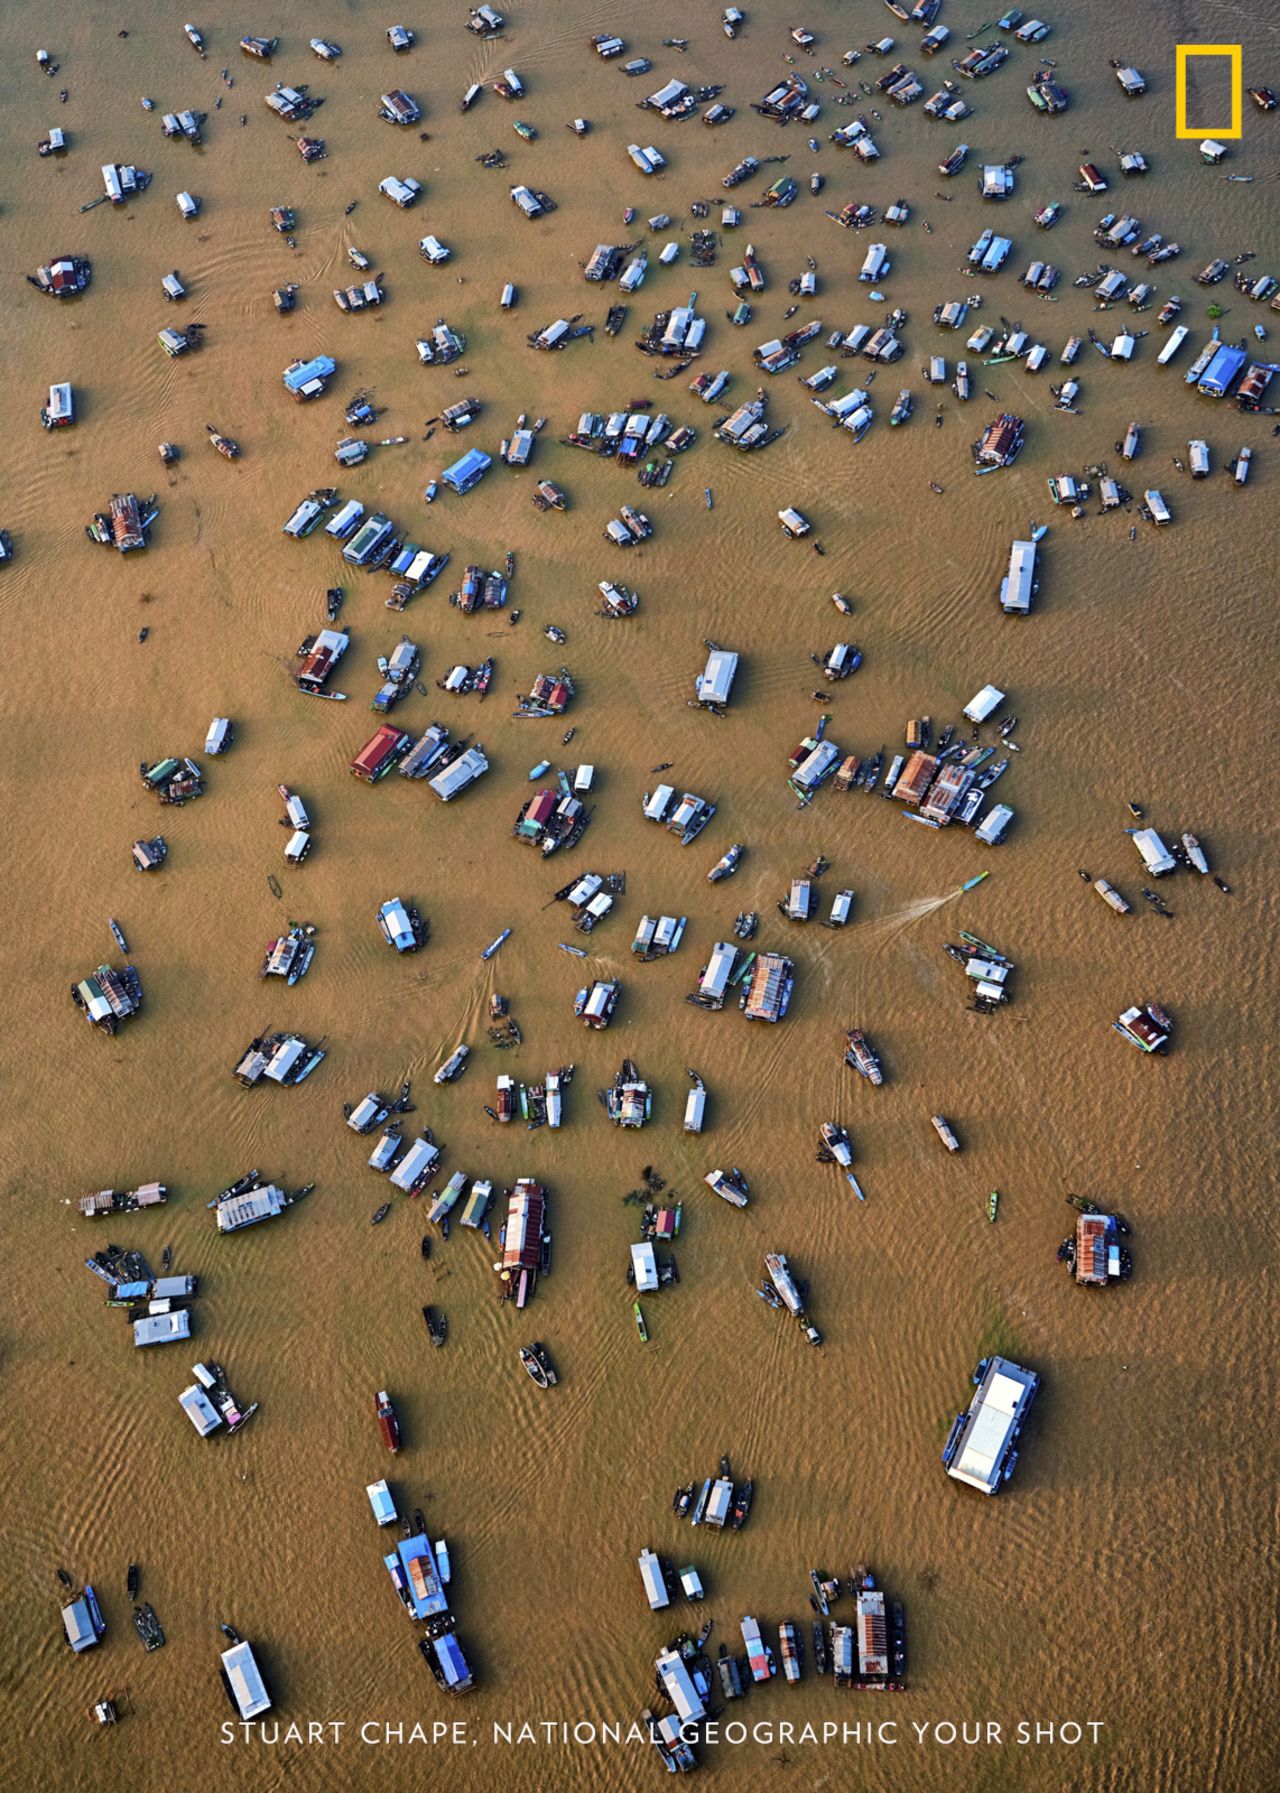 Photo: Stuart Chape, Samoa: "This aerial view of the Chong Kneas floating village on Tonle Sap lake, Cambodia, demonstrates just how threatened the great lake is from changing rainfall patterns and rising temperatures."<em> </em><em>Via National Geographic Your Shot</em>